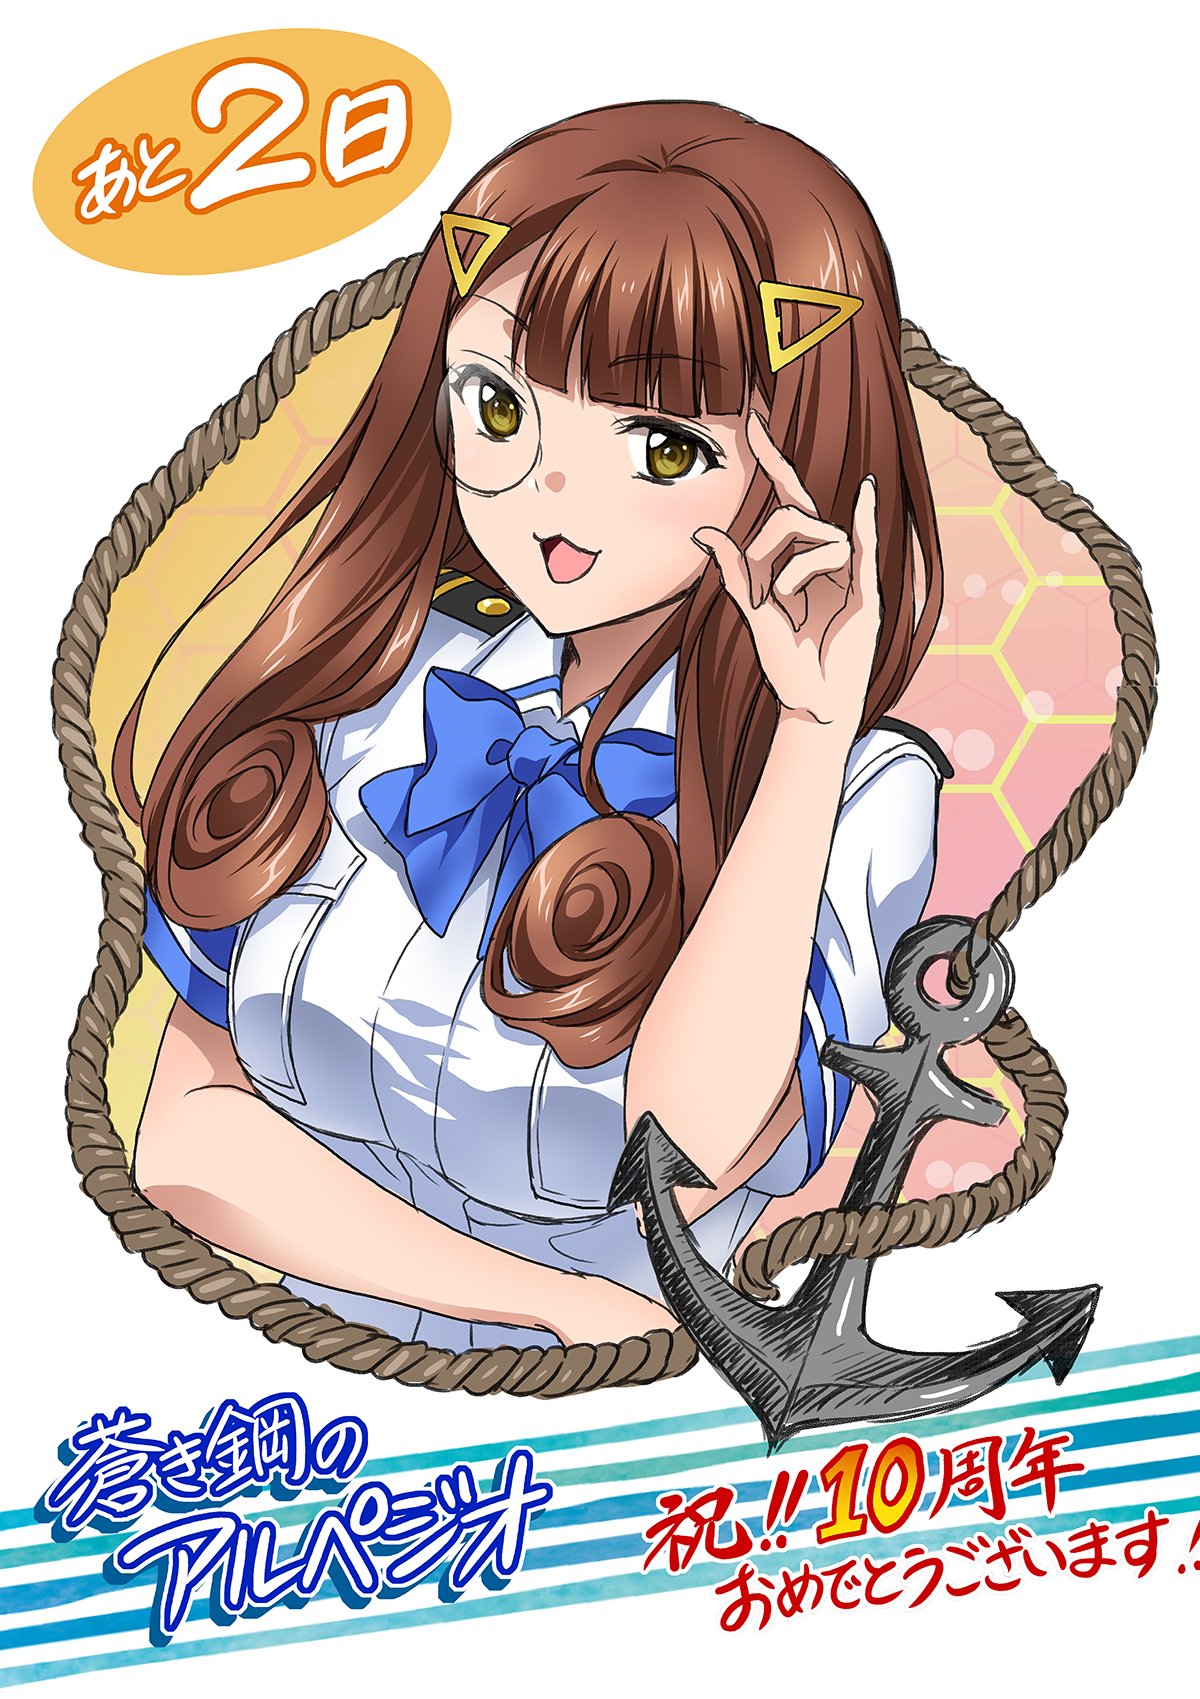 1girl :3 anchor aoki_hagane_no_arpeggio blue_neckwear brown_eyes brown_hair celebration commentary_request copyright_name countdown hair_ornament hairclip highres honeycomb_(pattern) honeycomb_background hyuuga_(aoki_hagane_no_arpeggio) itsuki_sayaka long_hair looking_at_viewer military military_uniform monocle naval_uniform rope smile solo translation_request uniform upper_body white_background